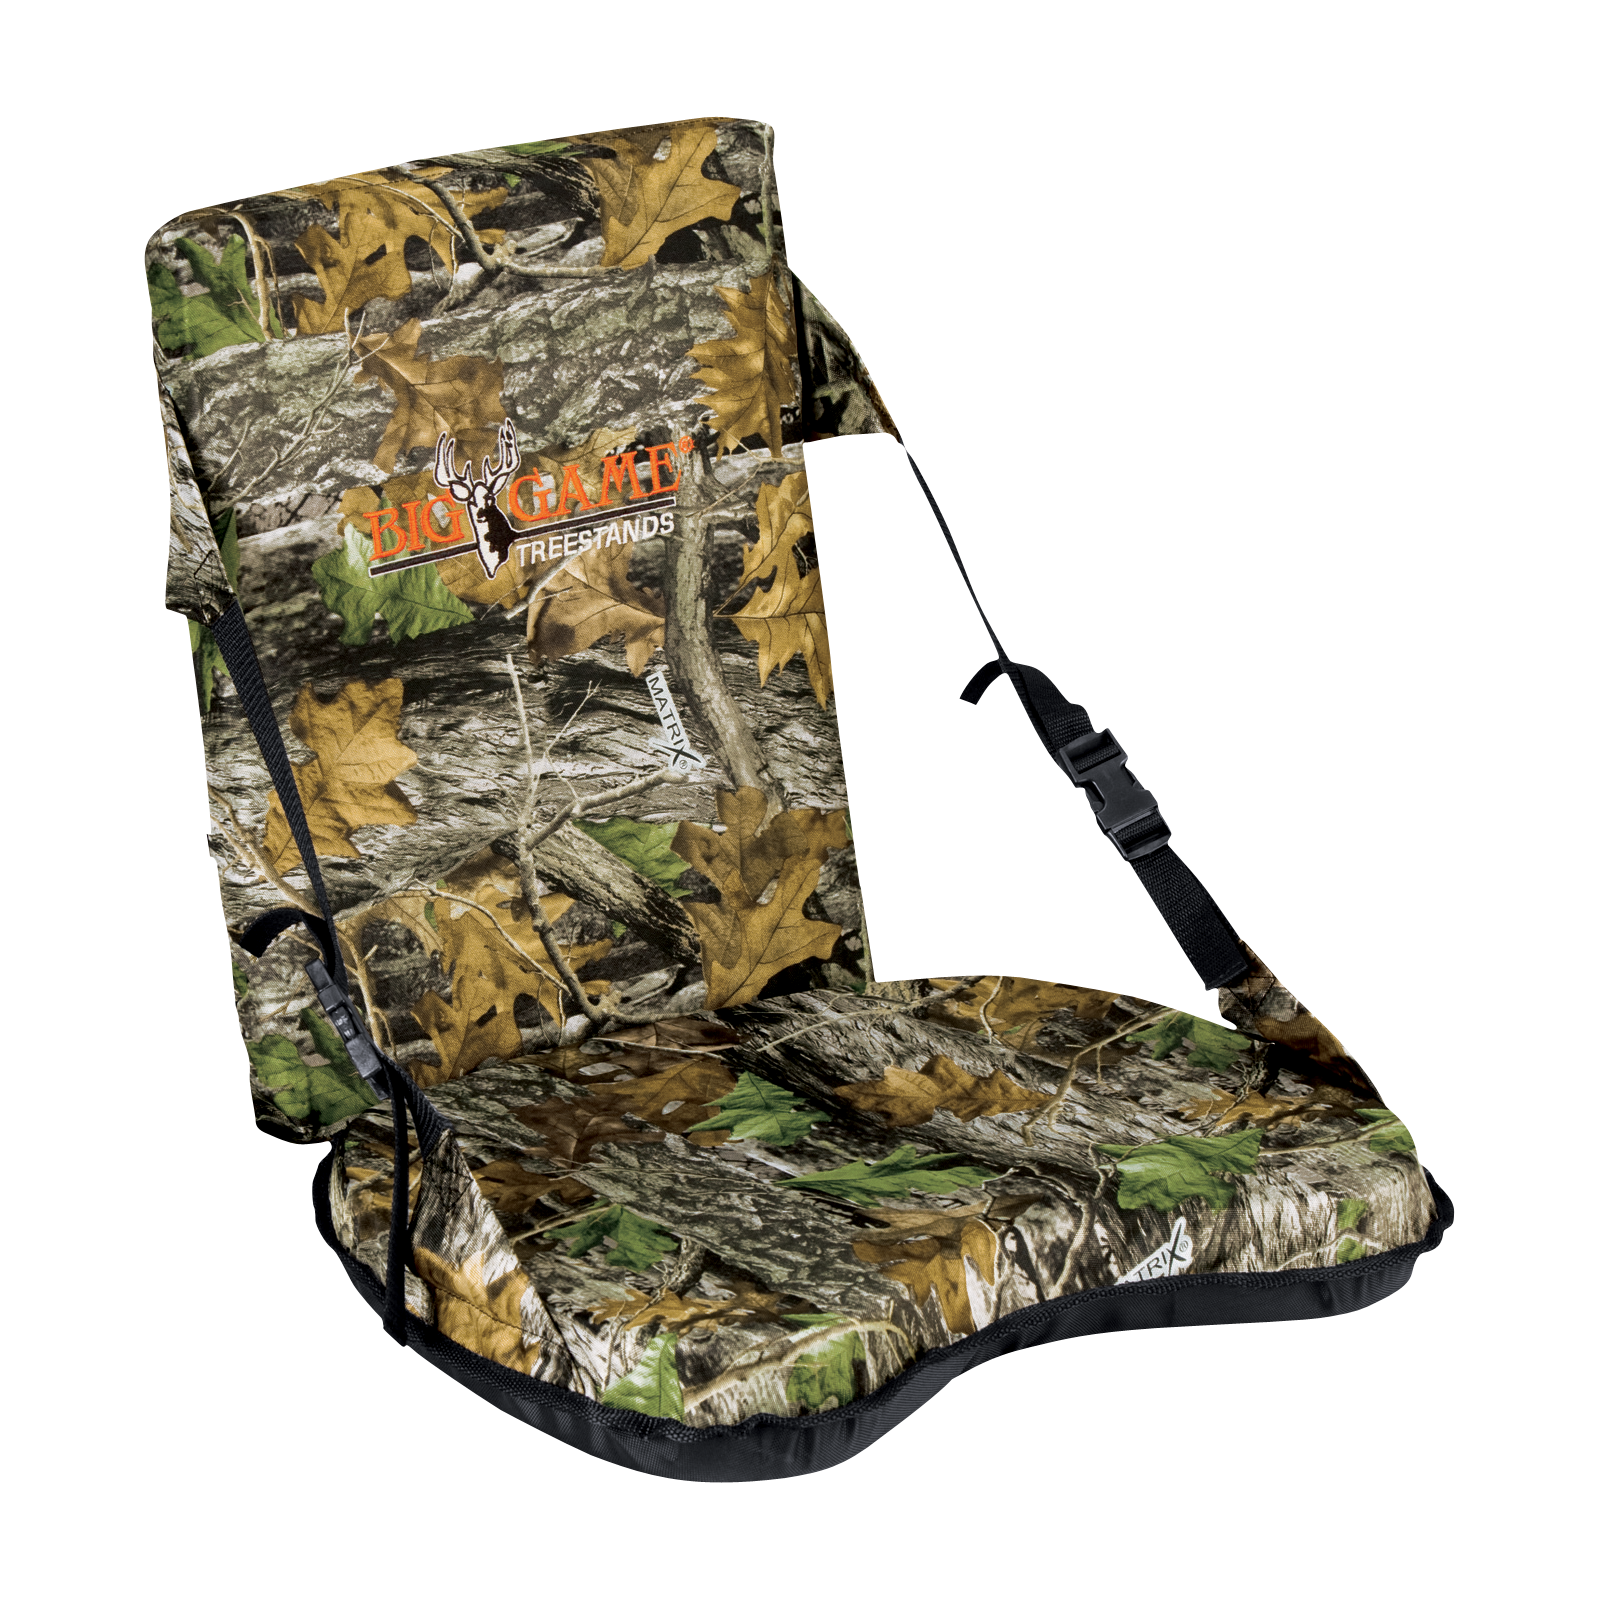 Tail Mate GelCore Seat Cushion (6-Pack) for Hunting, Fishing, or Outdoors